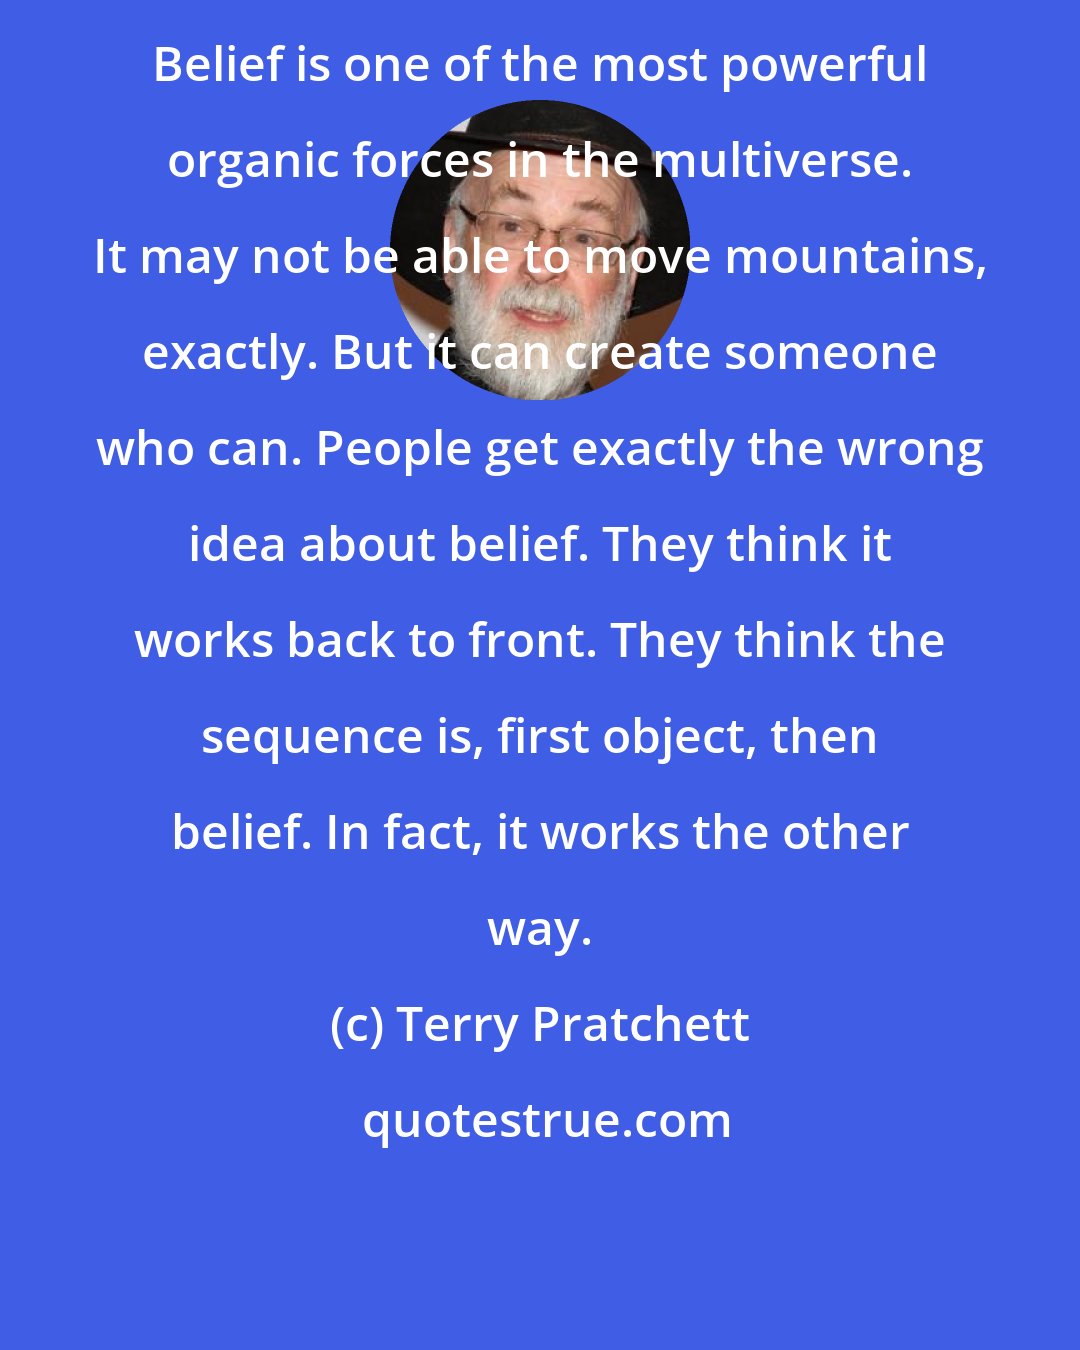 Terry Pratchett: Belief is one of the most powerful organic forces in the multiverse. It may not be able to move mountains, exactly. But it can create someone who can. People get exactly the wrong idea about belief. They think it works back to front. They think the sequence is, first object, then belief. In fact, it works the other way.